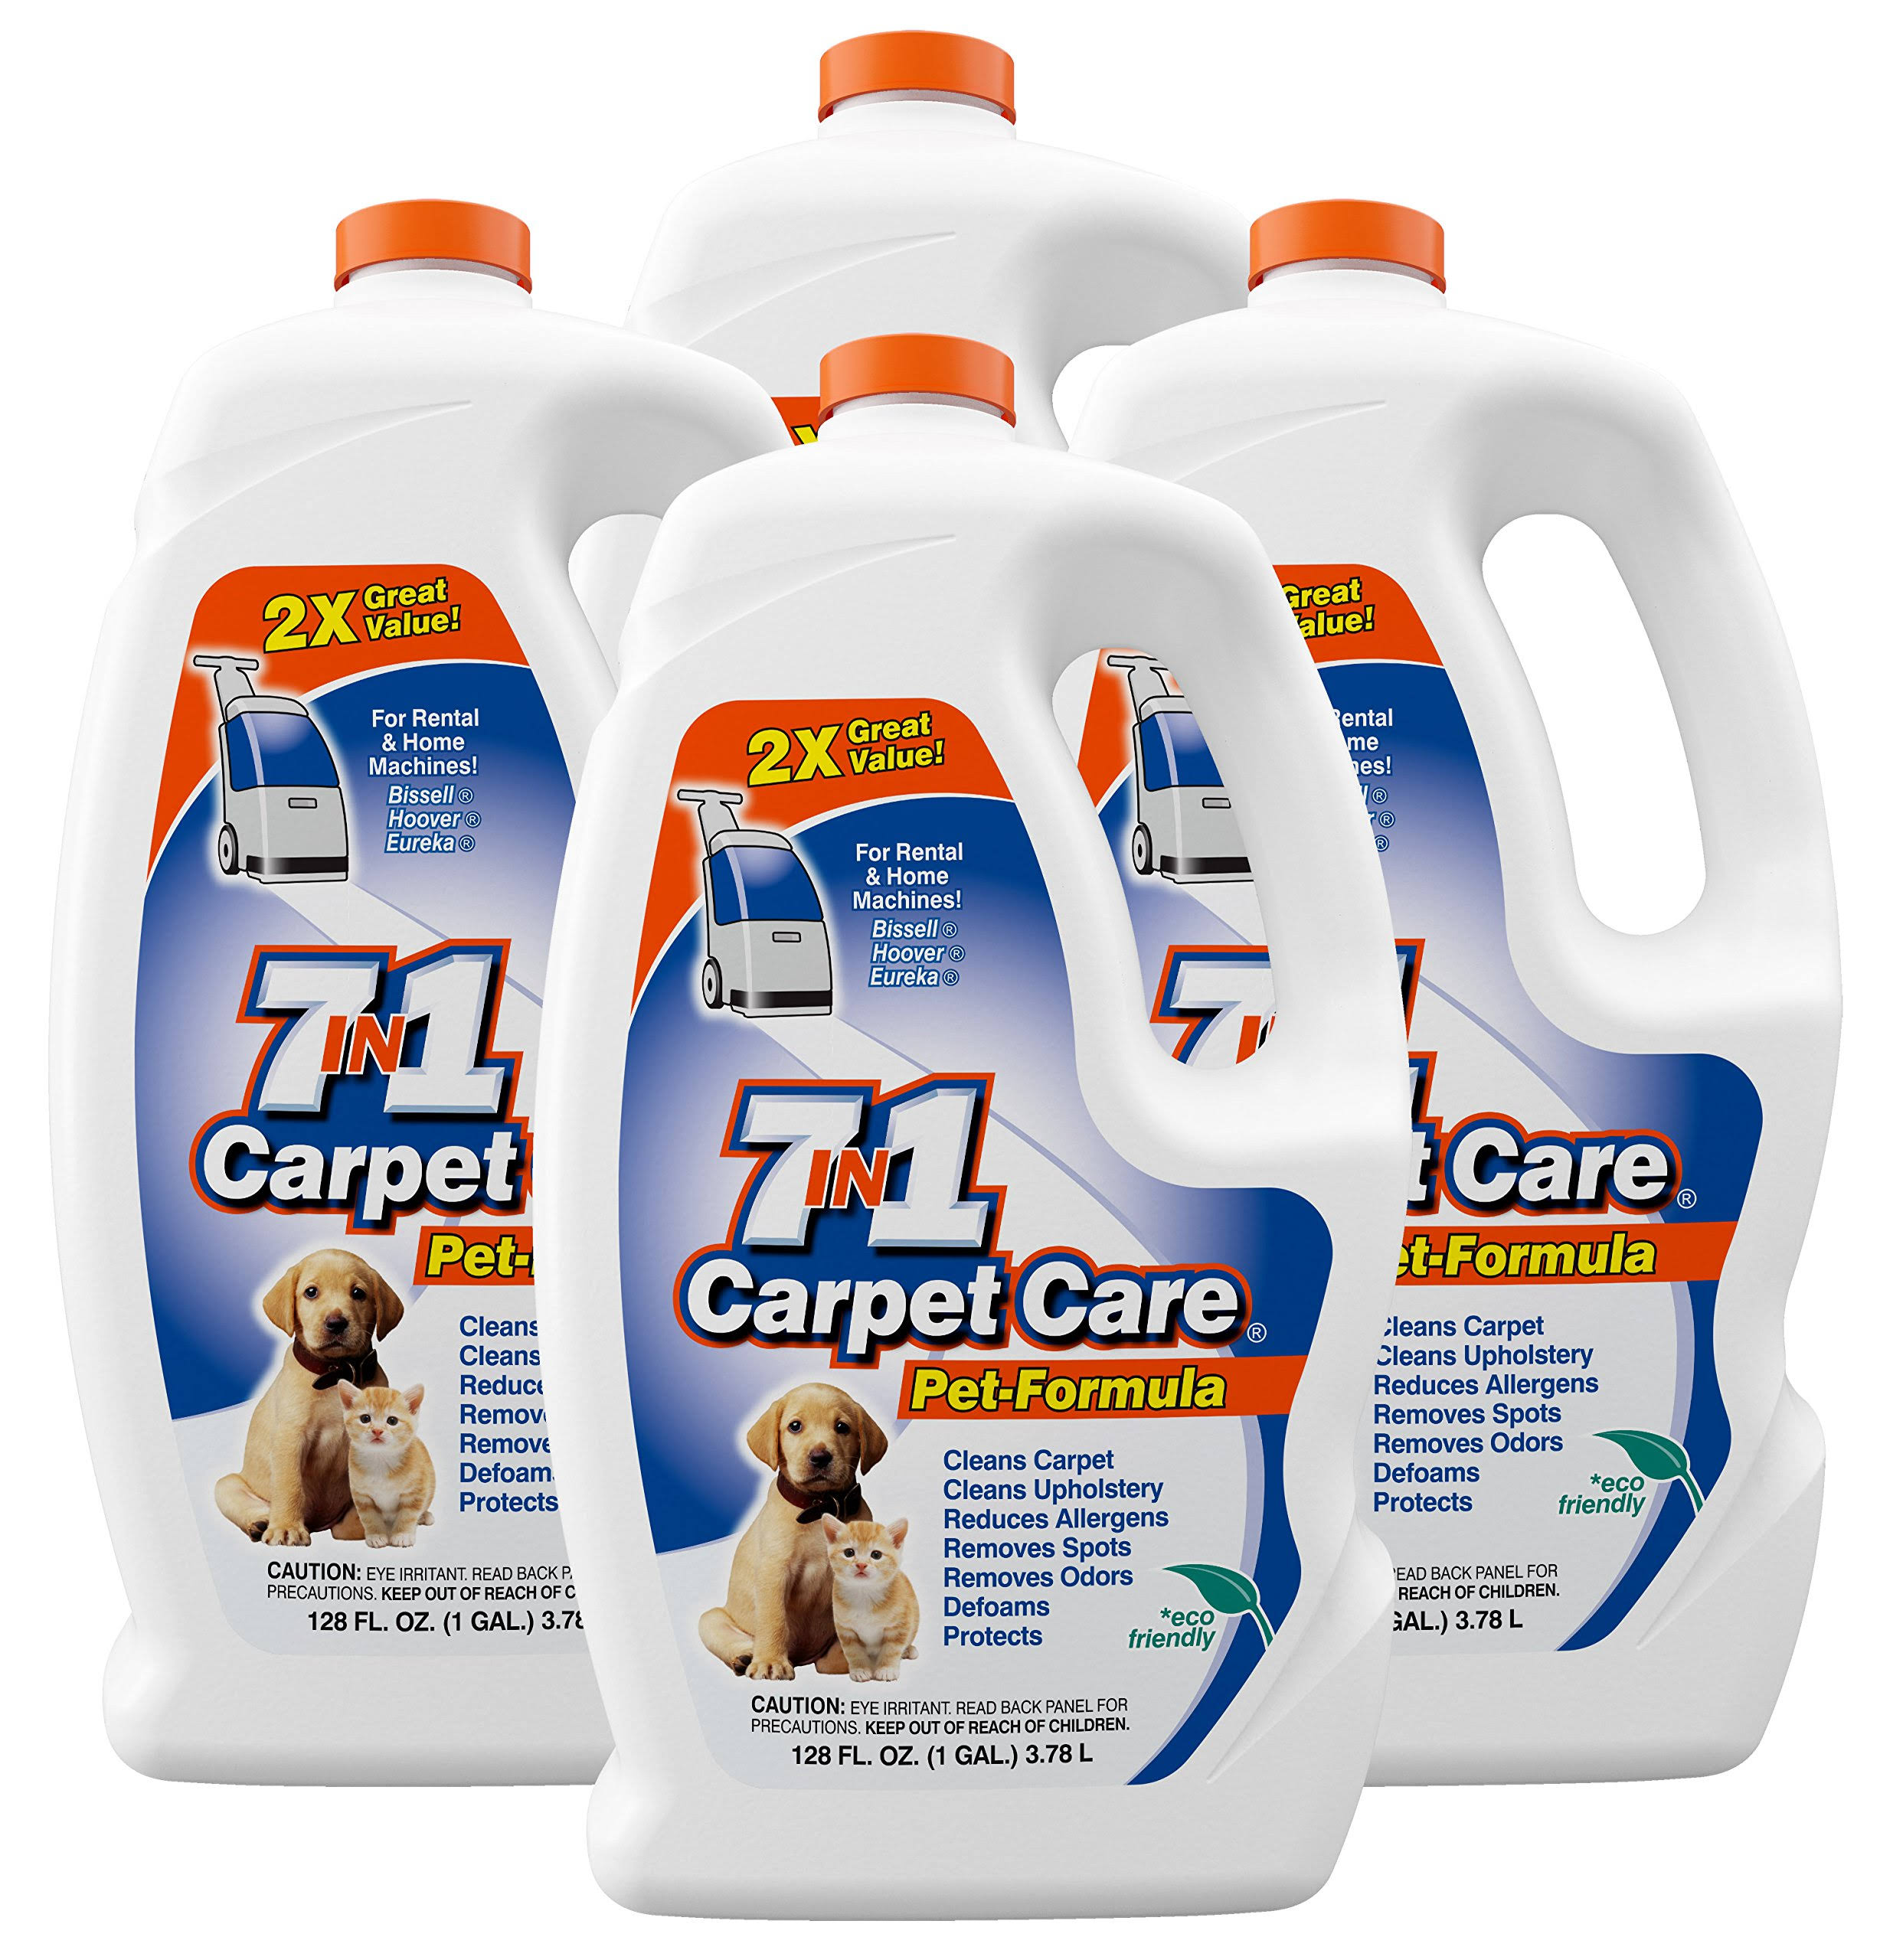 7in1 Carpet Care Pet Formula Carpet Cleaning Solution for Odors and Stains, 4